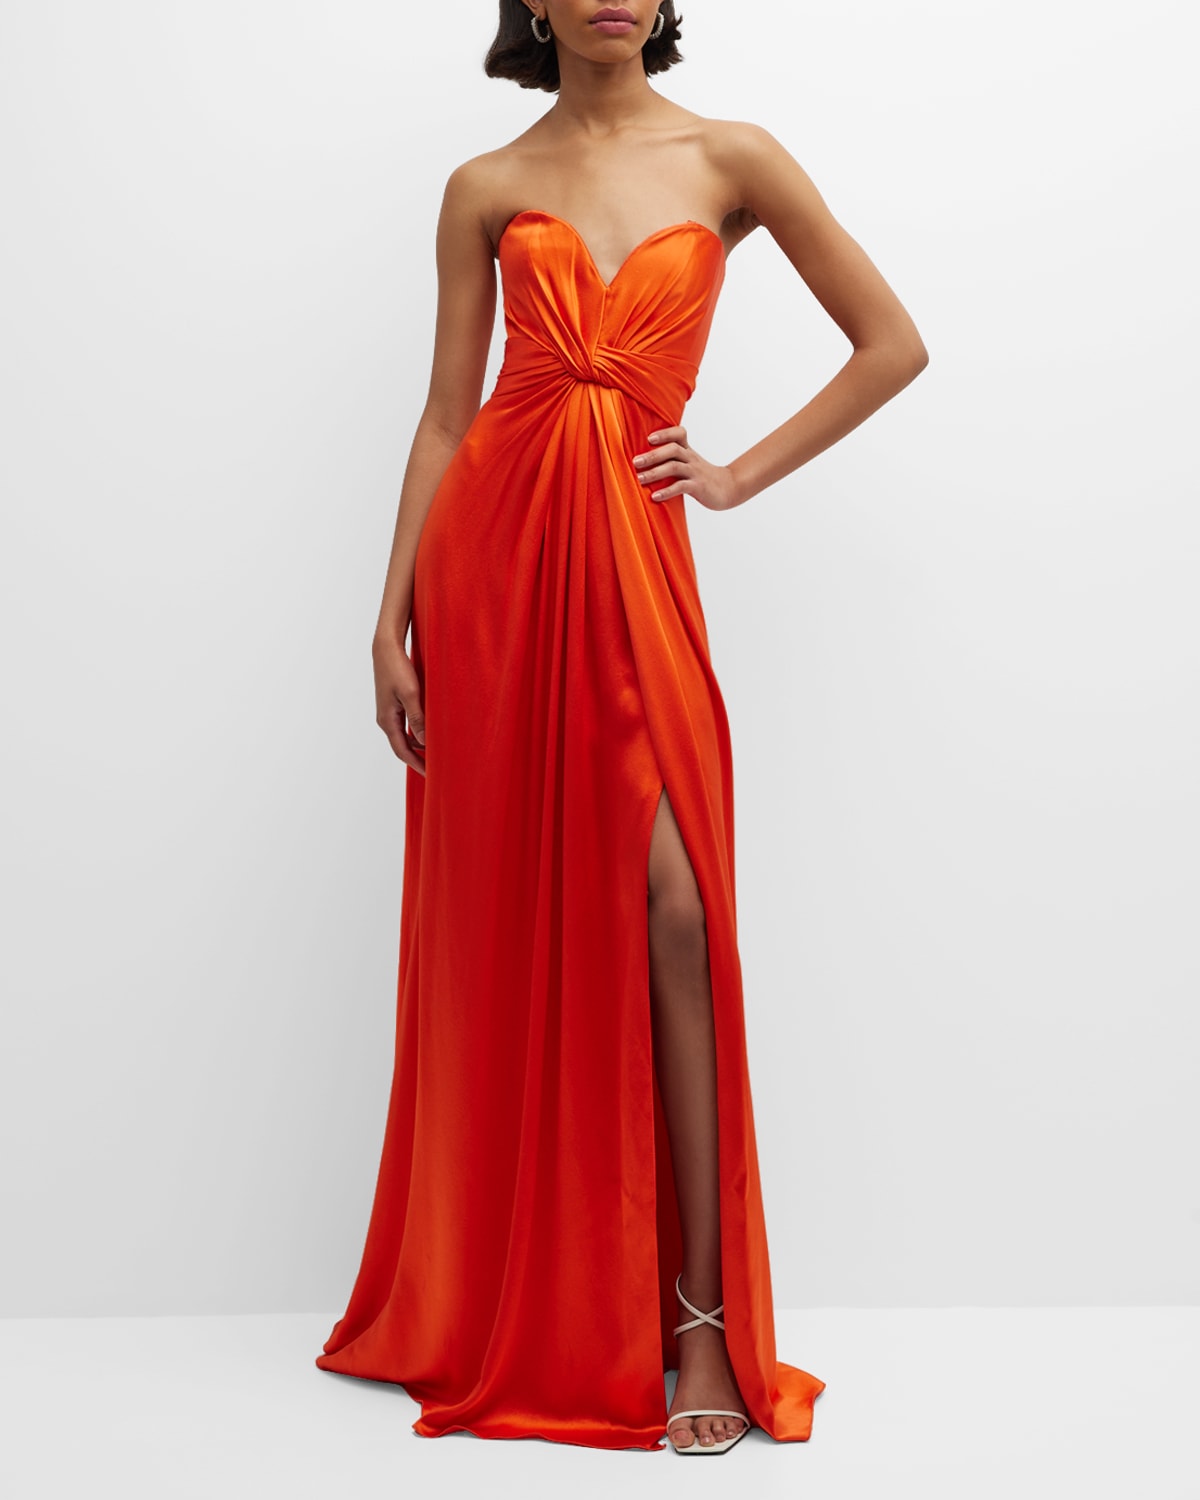 MONIQUE LHUILLIER STRAPLESS GOWN WITH TWIST-DRAPED BODICE